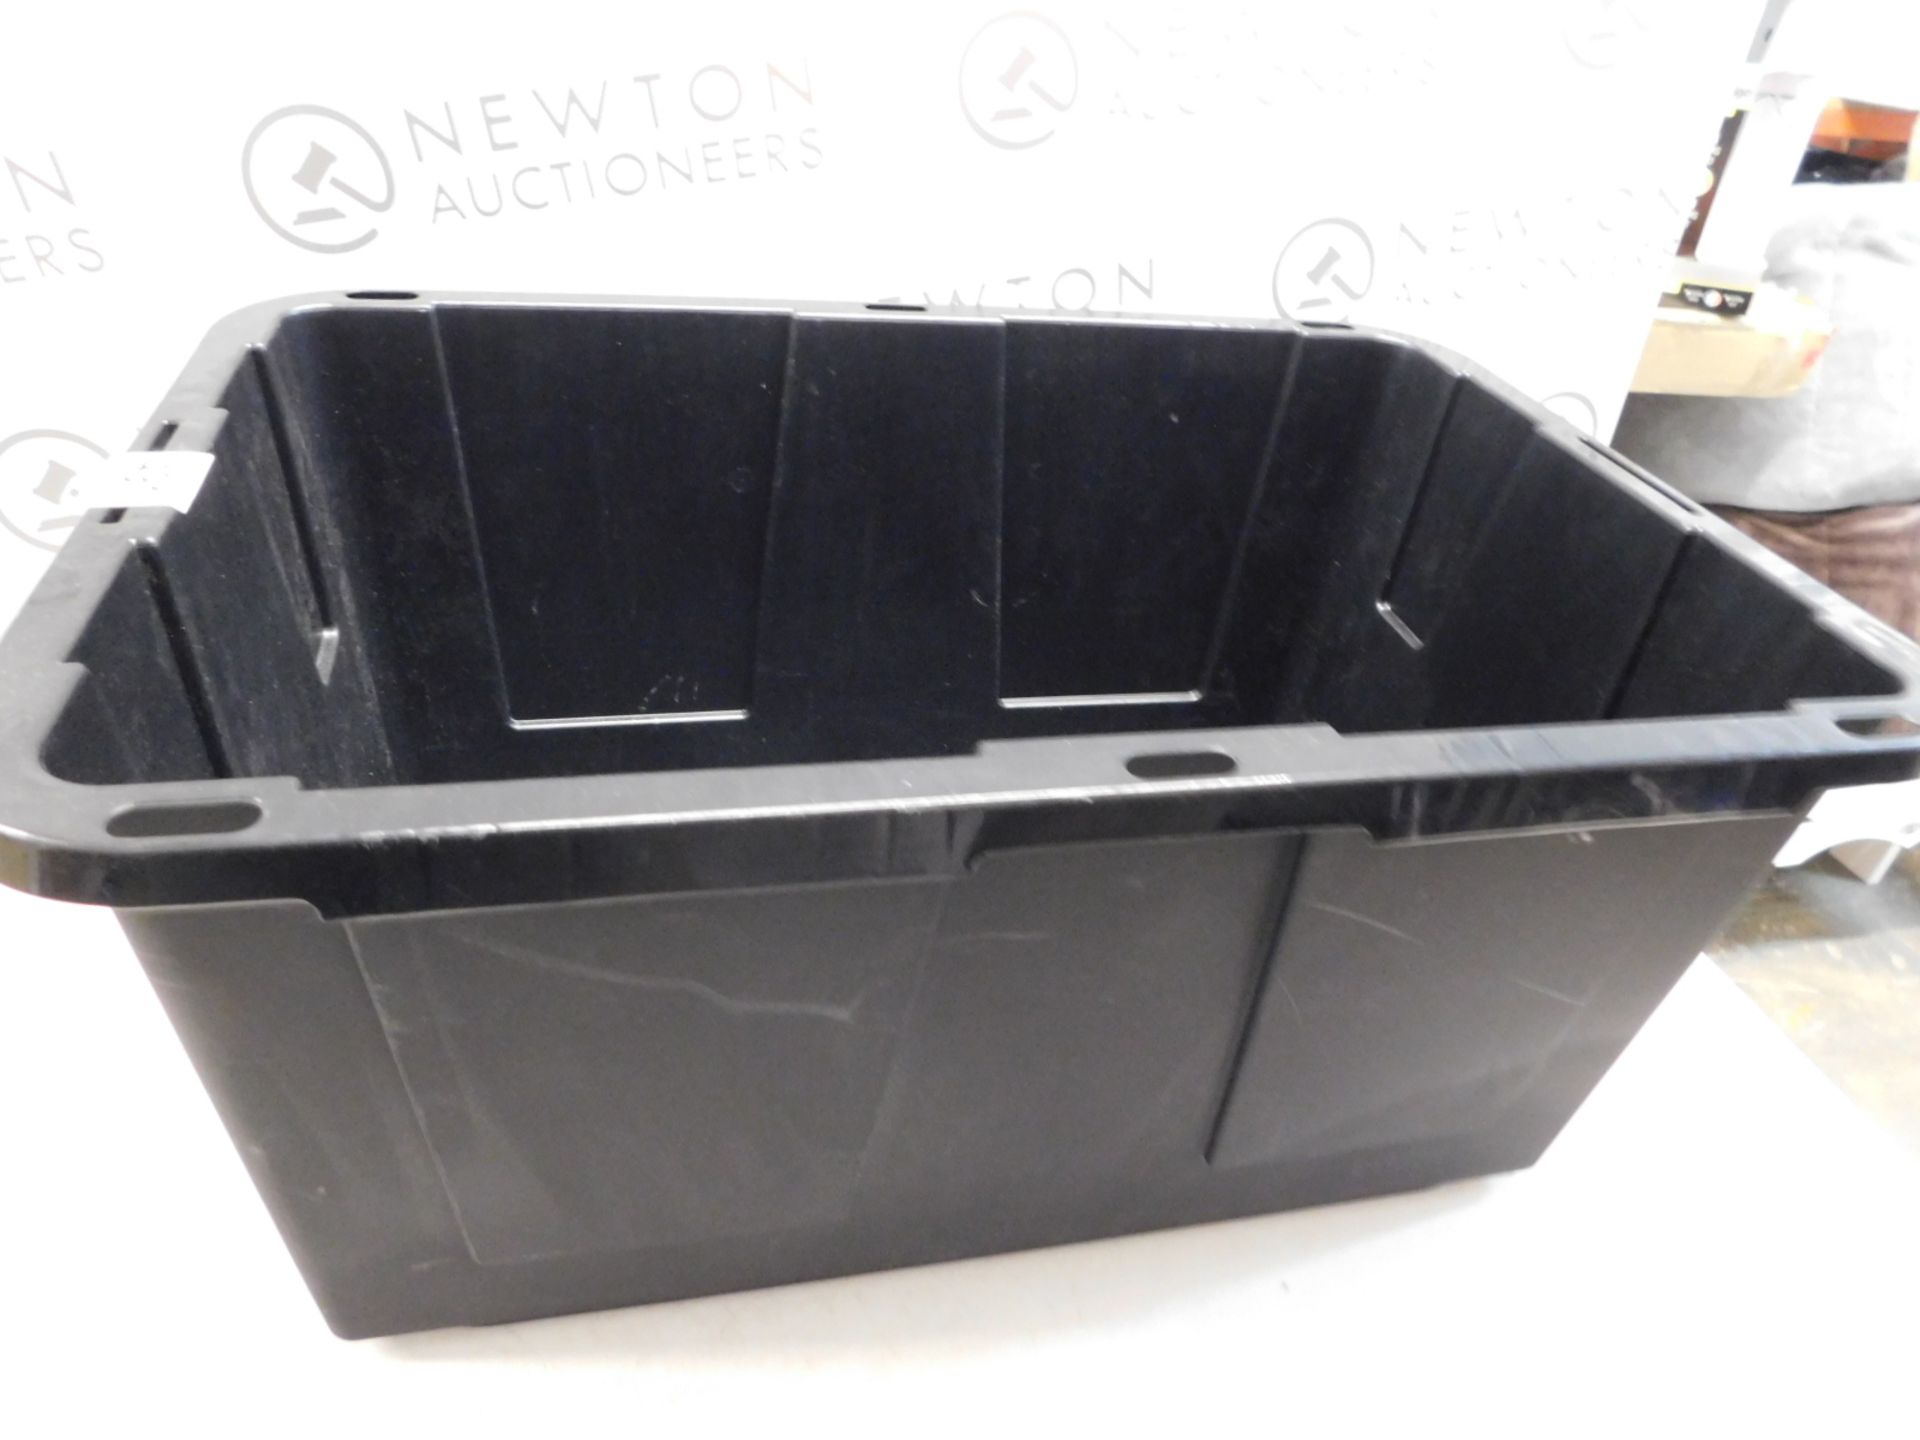 1 PROFESSIONAL GRADE STORAGE SYSTEM BOX (27 GALLONS) RRP £29.99